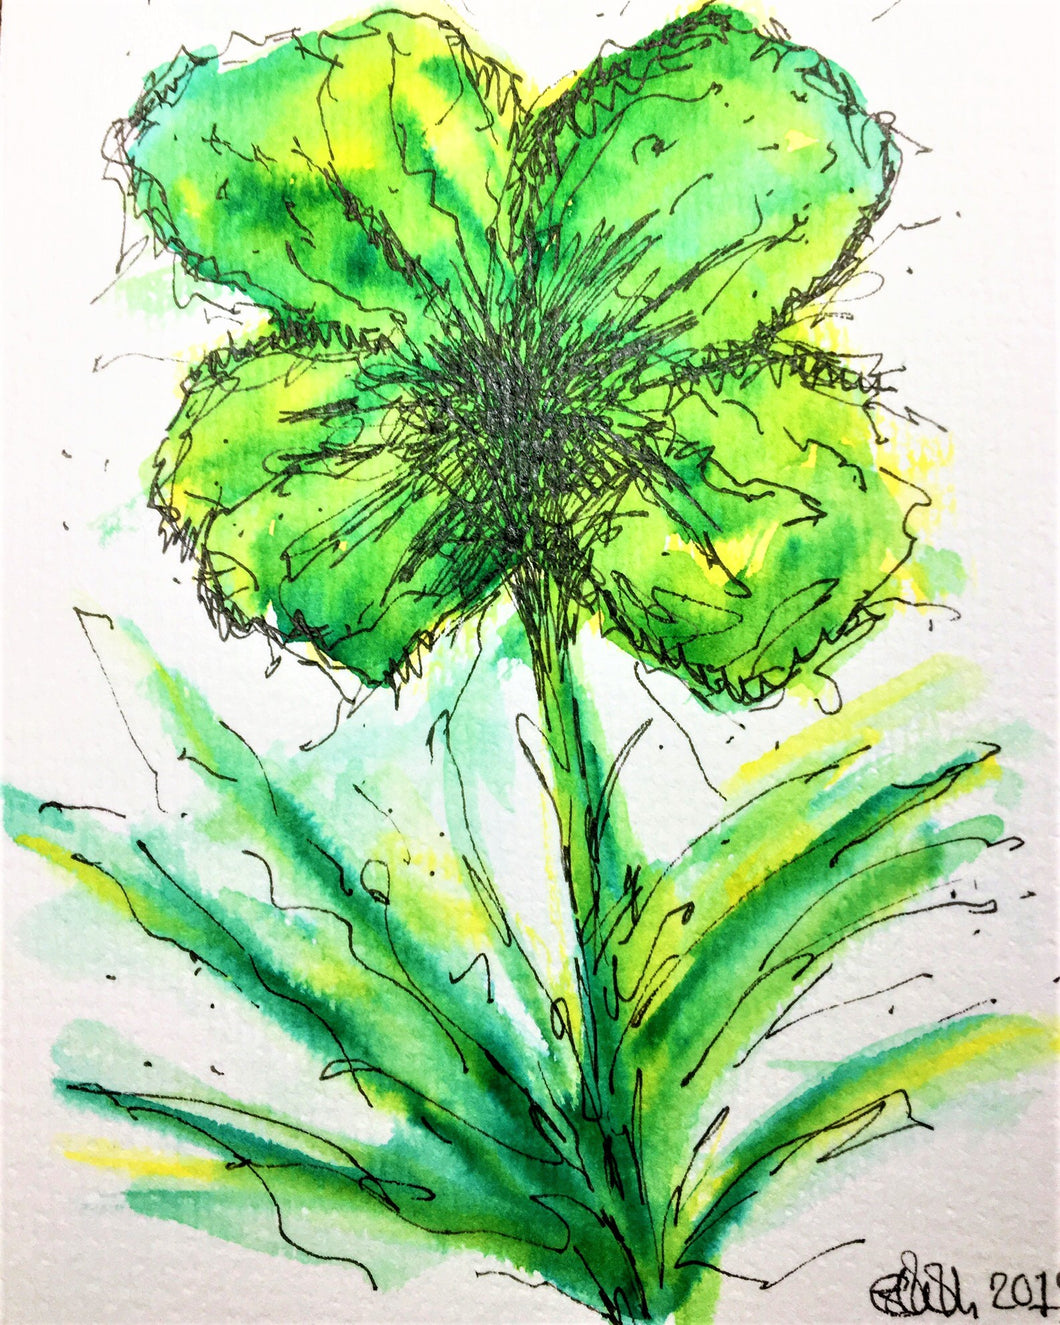 Hand-painted Greeting Card - Abstract Green/Yellow Pansy Design - eDgE dEsiGn London